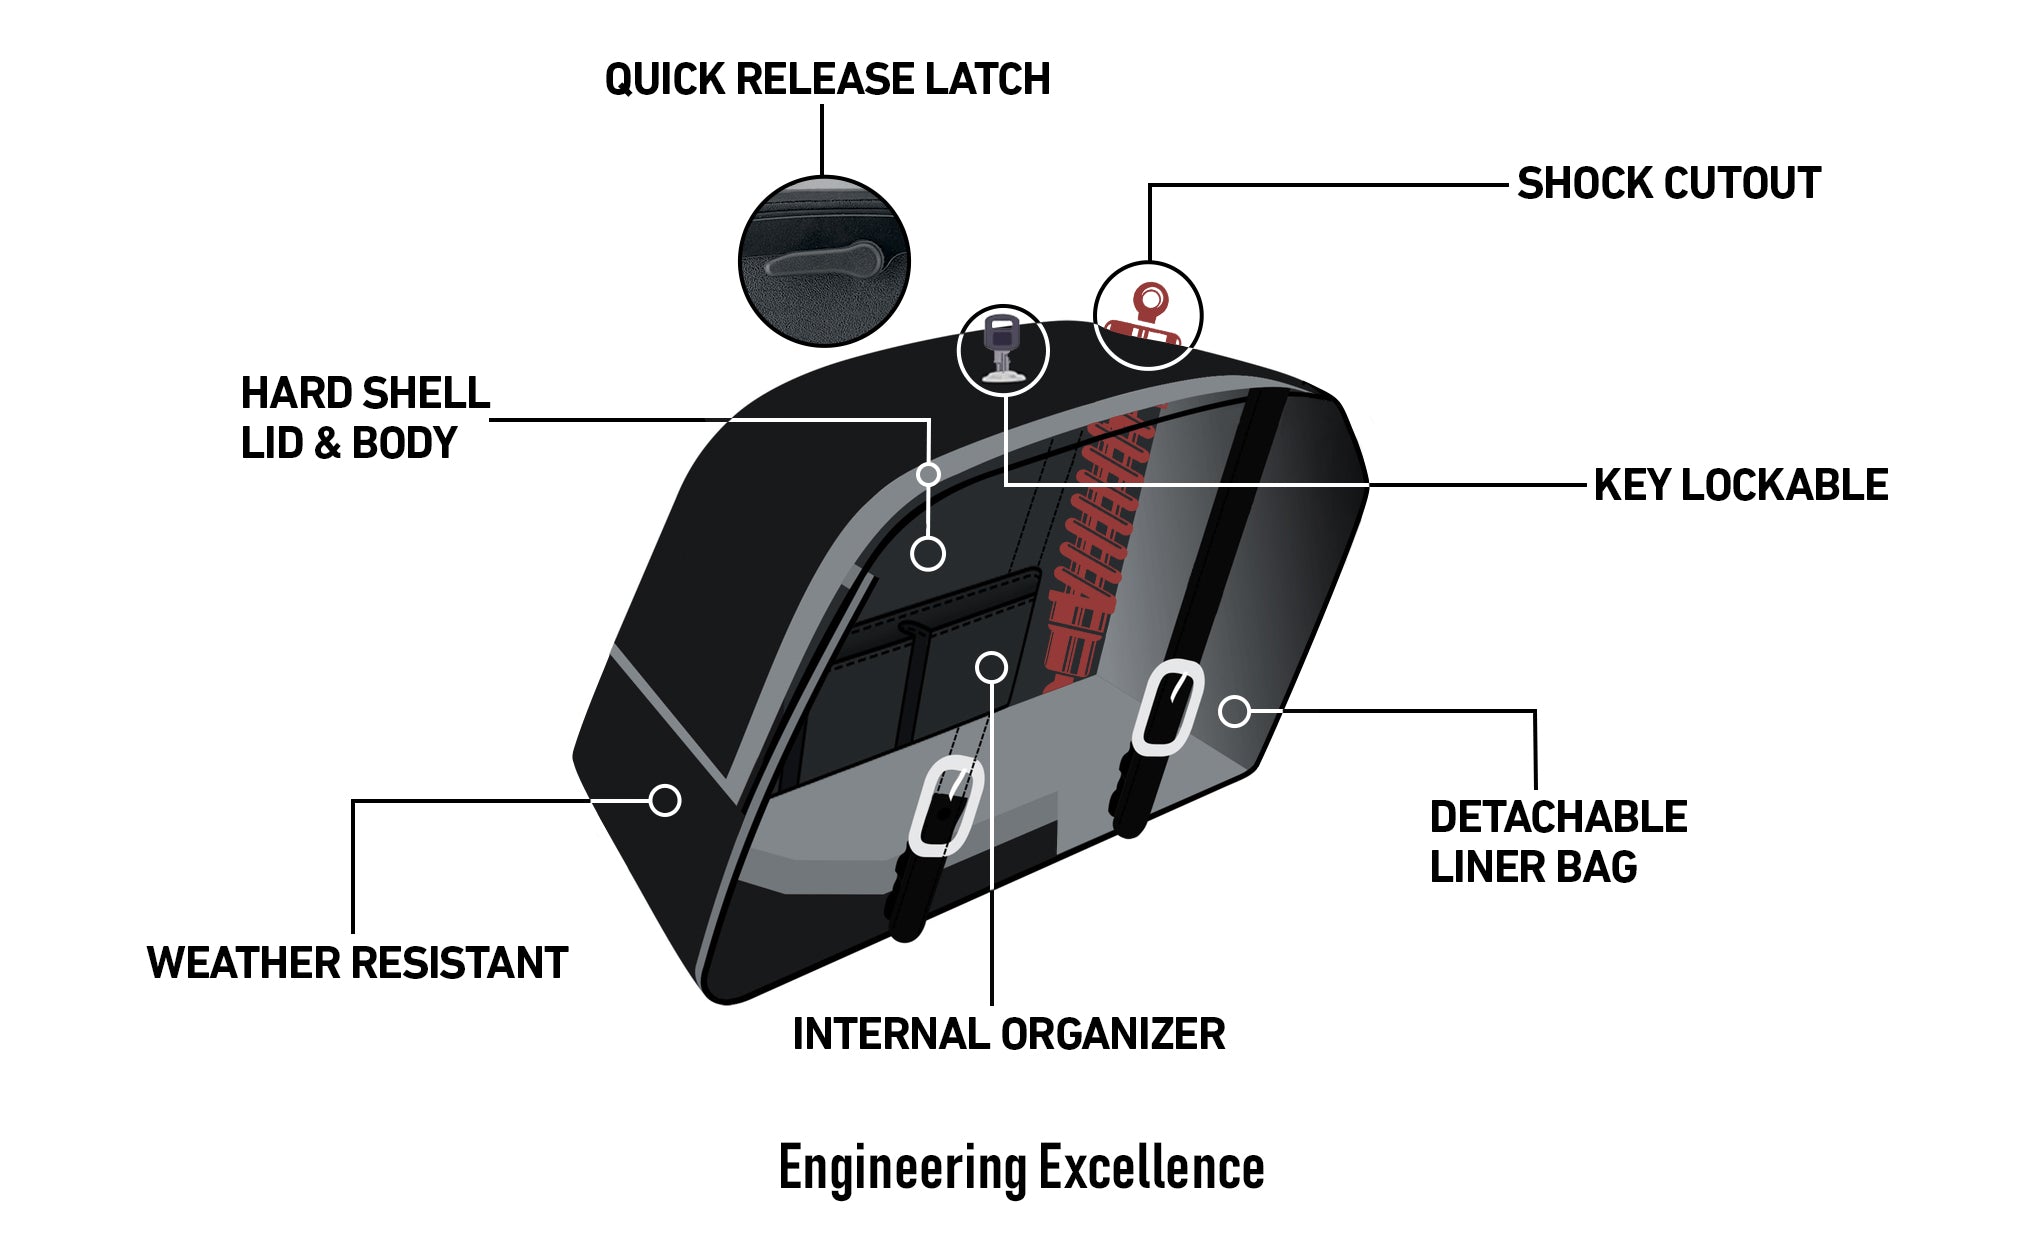 Viking Baldur Extra Large Shock Cut Out Painted Motorcycle Hard Saddlebags For Harley Dyna Super Glide Fxd I Engineering Excellence with Bag on Bike @expand